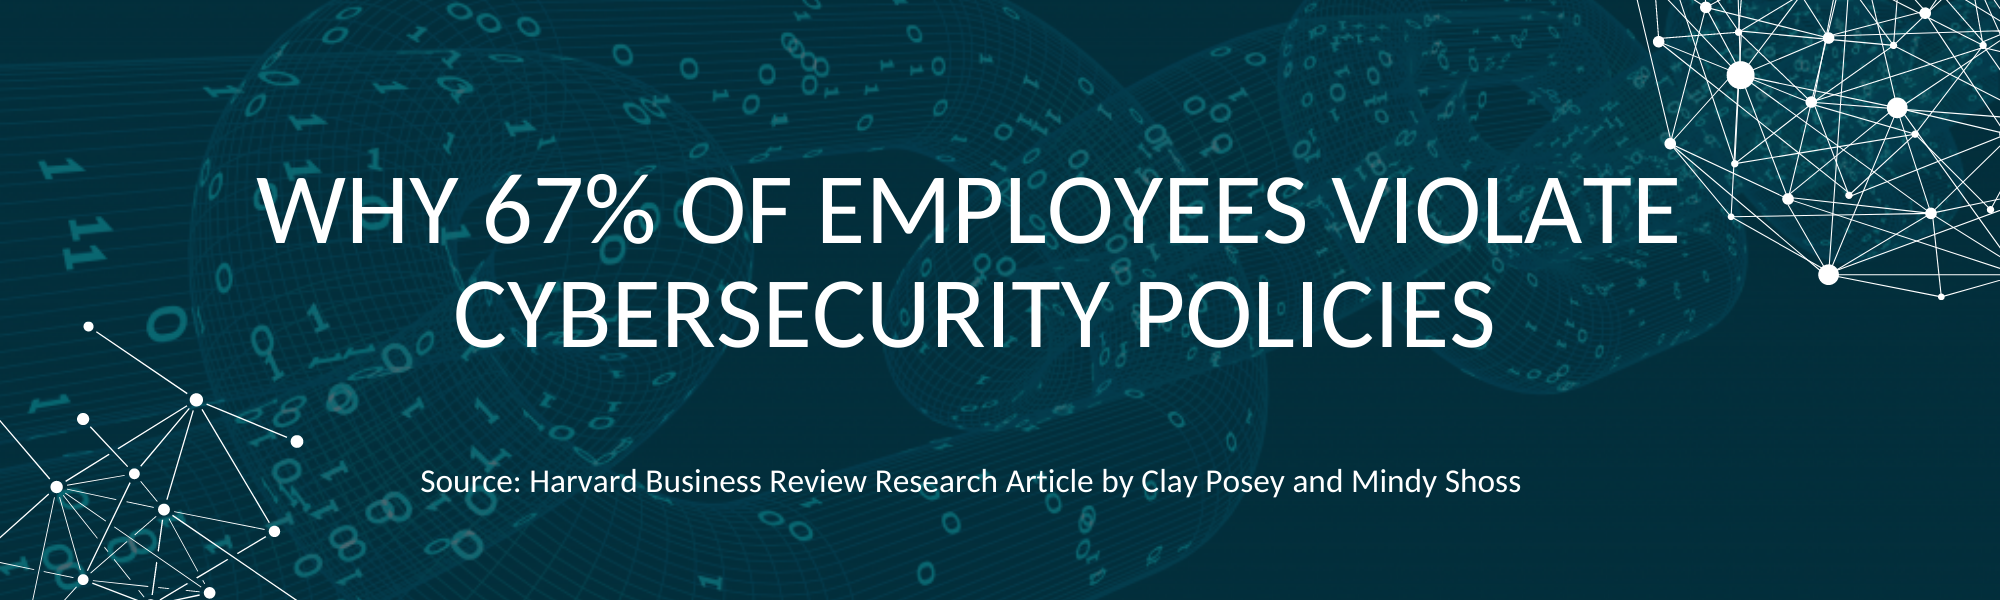 Why 67% of employees violate cybersecurity policies